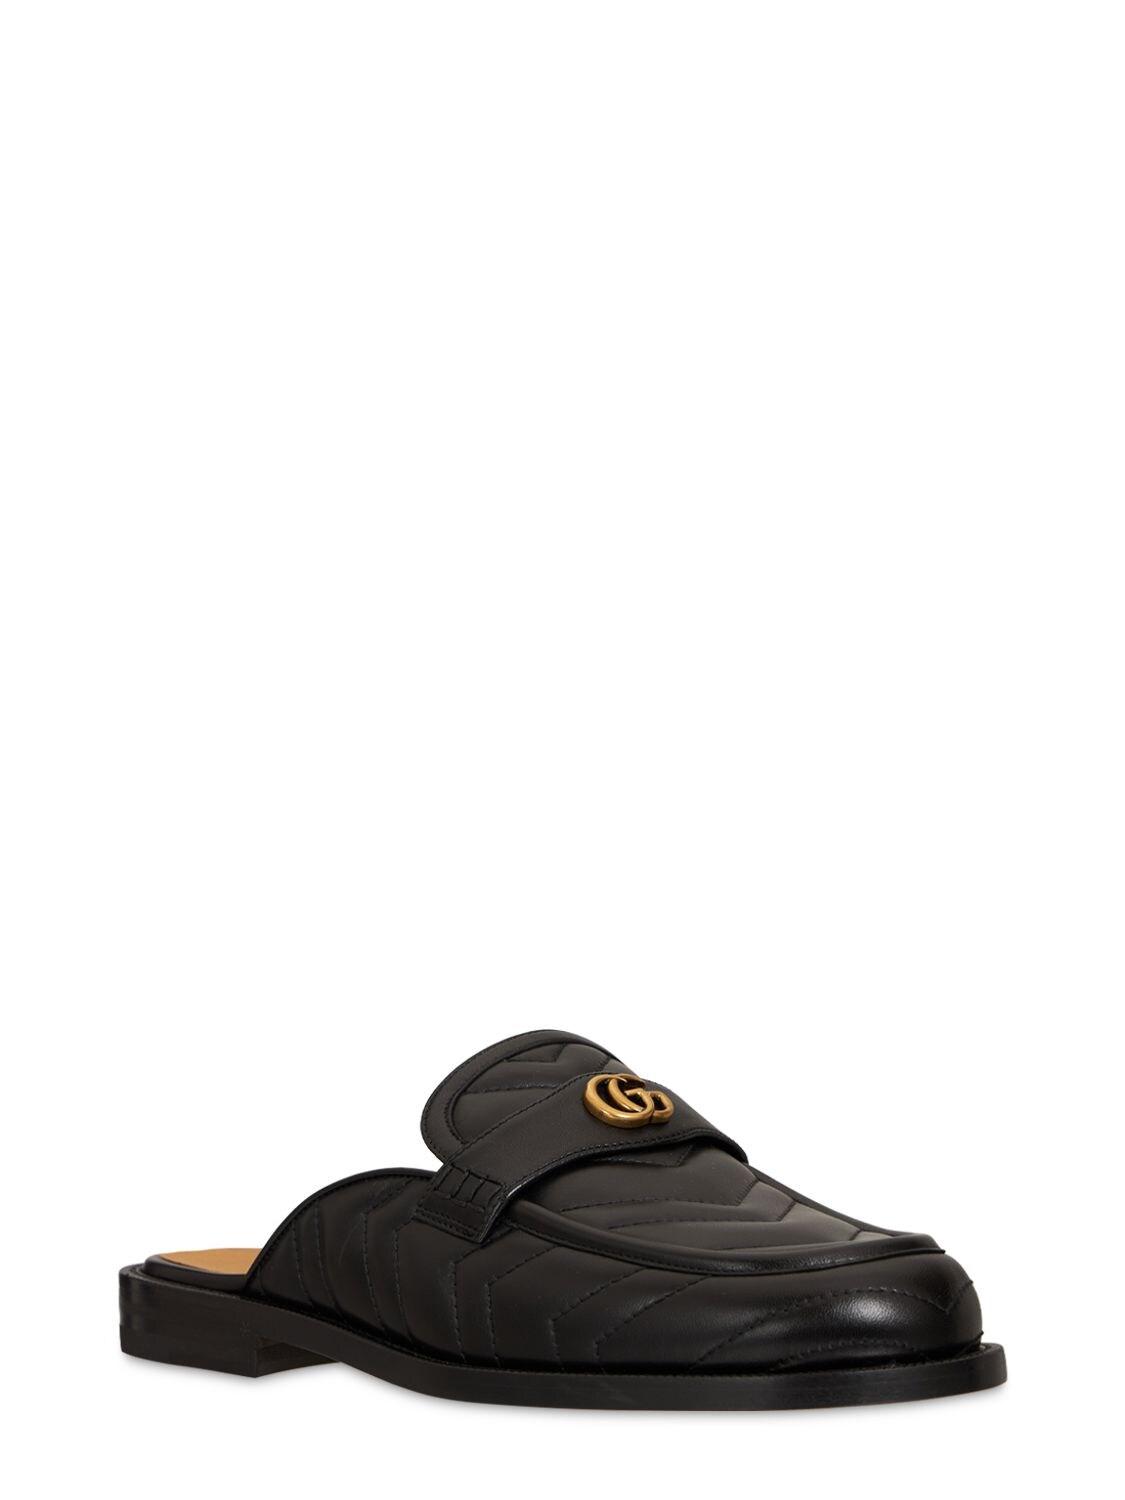 Gucci Double G Matelassé Leather Slippers in Black for Men | Lyst